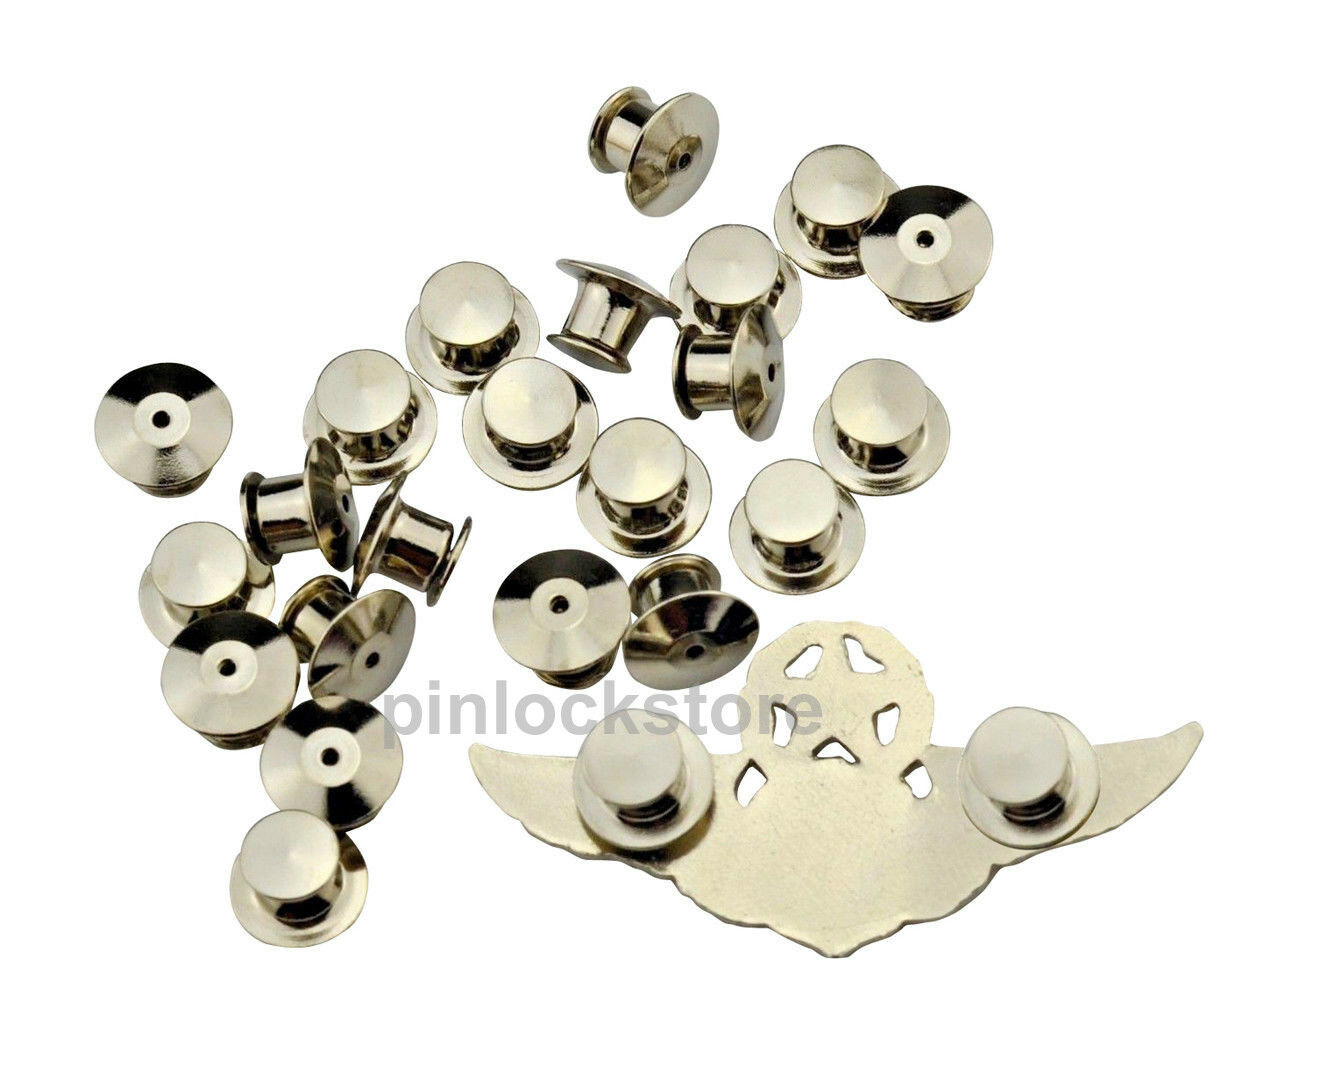 50 Low Profile Locking Pin Backs/pin Keepers For All Pin Post Pins No Tool Req'd